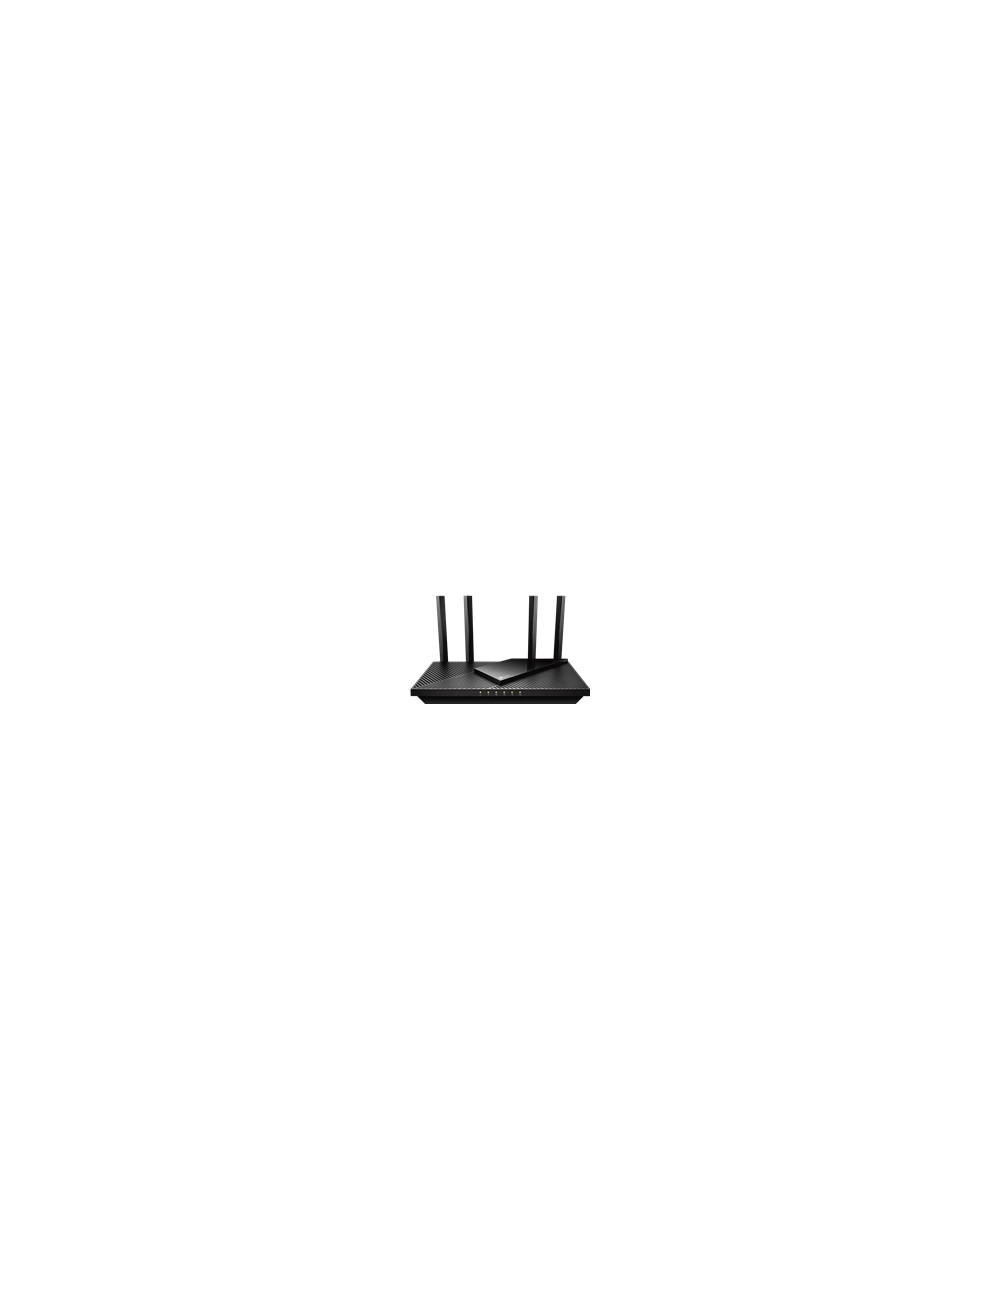 TP-LINK AX3000 Dual-Band Wi-Fi 6 Router